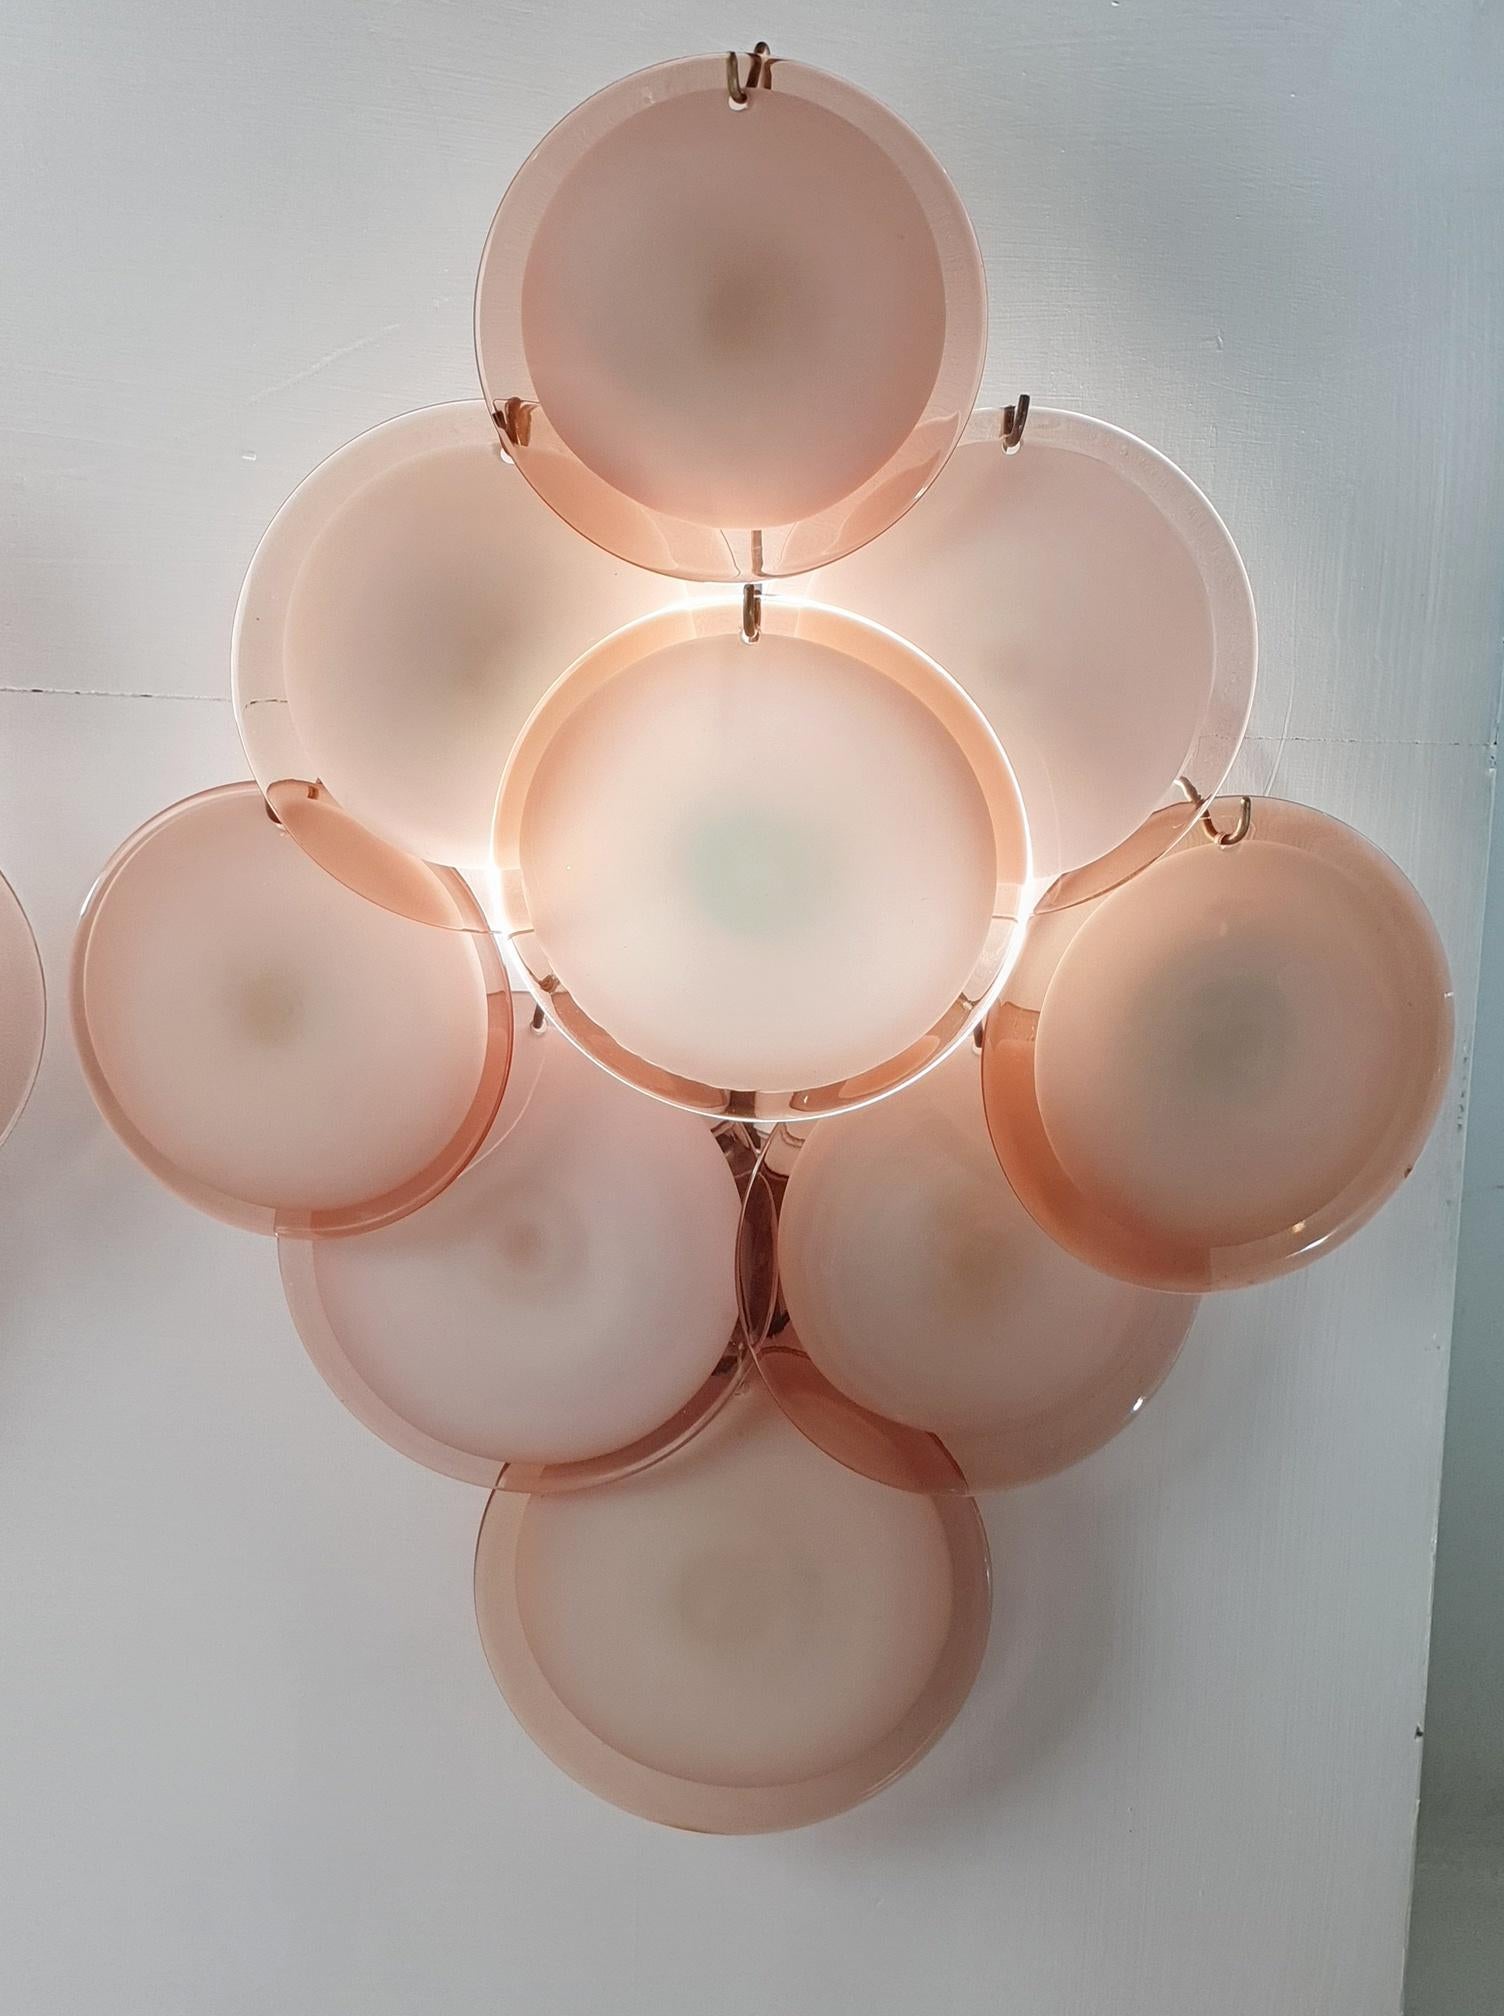 Pair of extra-large wall sconces by Vistosi Murano, in amber/pink tones. The glass discs are handmade with a white opaque centre covered with an amber/pink clear glass. Each sconce nine discs of slightly various size and execution since they are